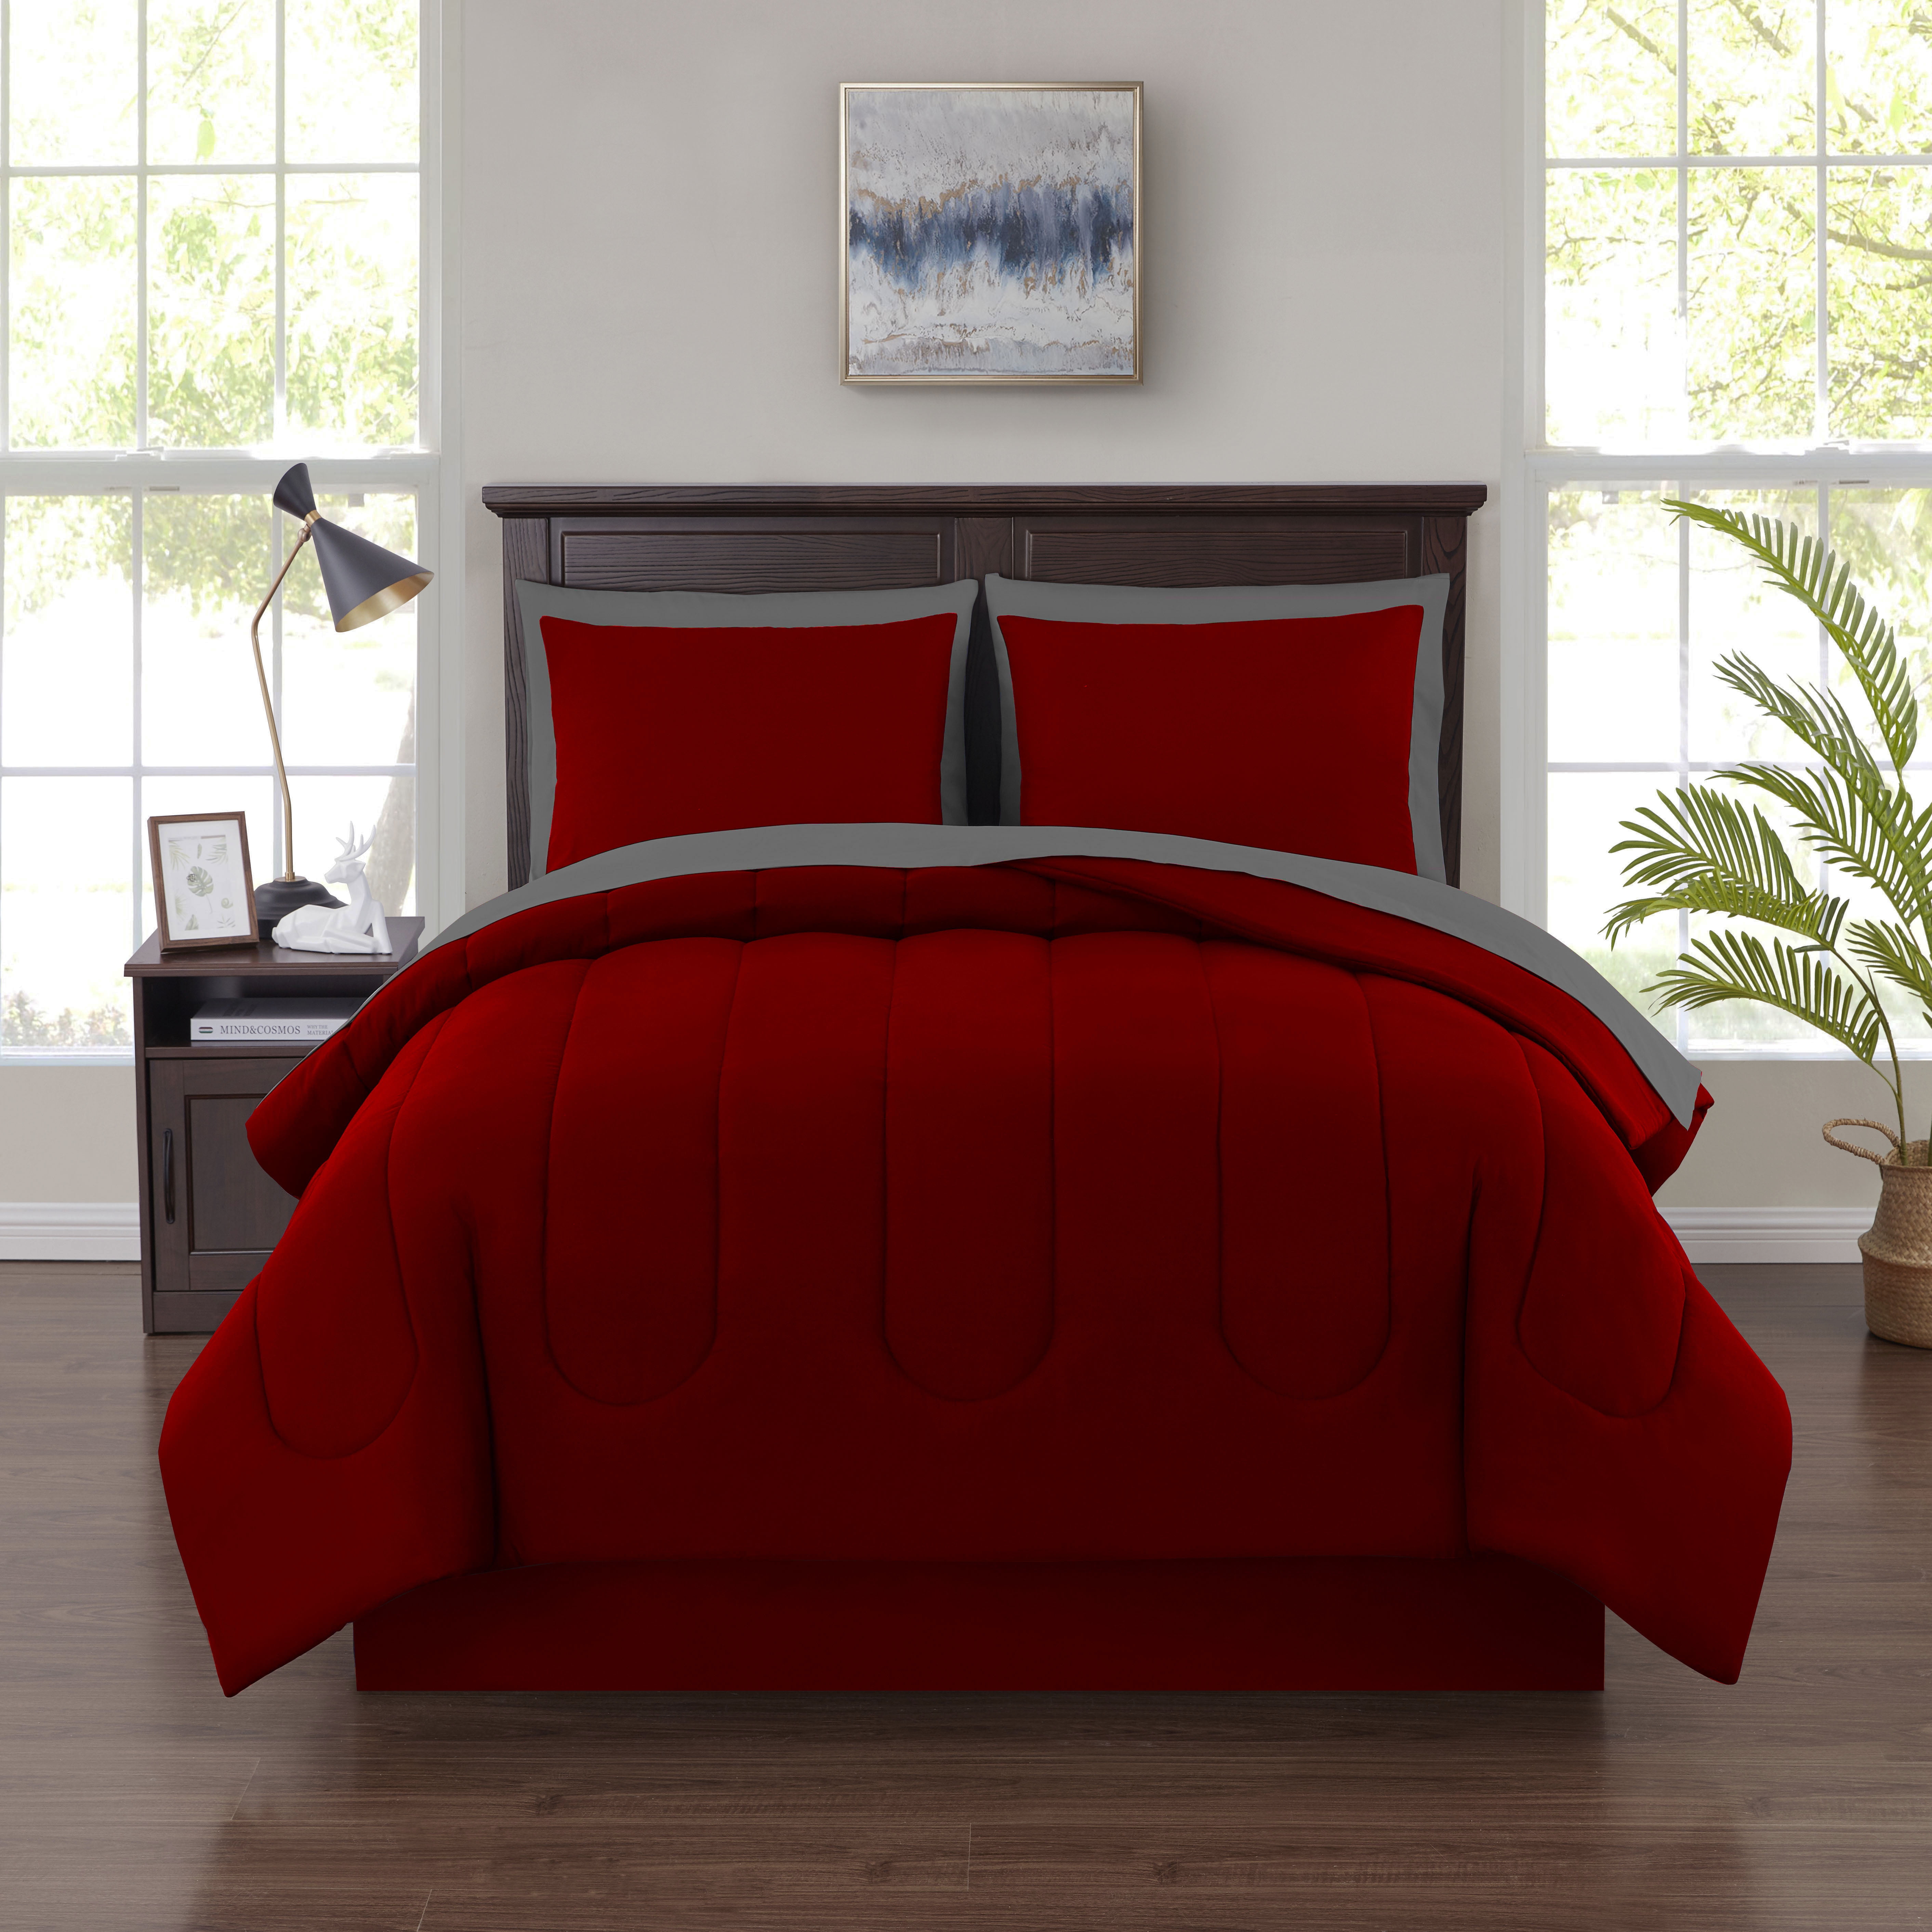 New Red Black 8 Piece Twin Twin XL Comforter Set Sheets Bed Skirt Bedspread 